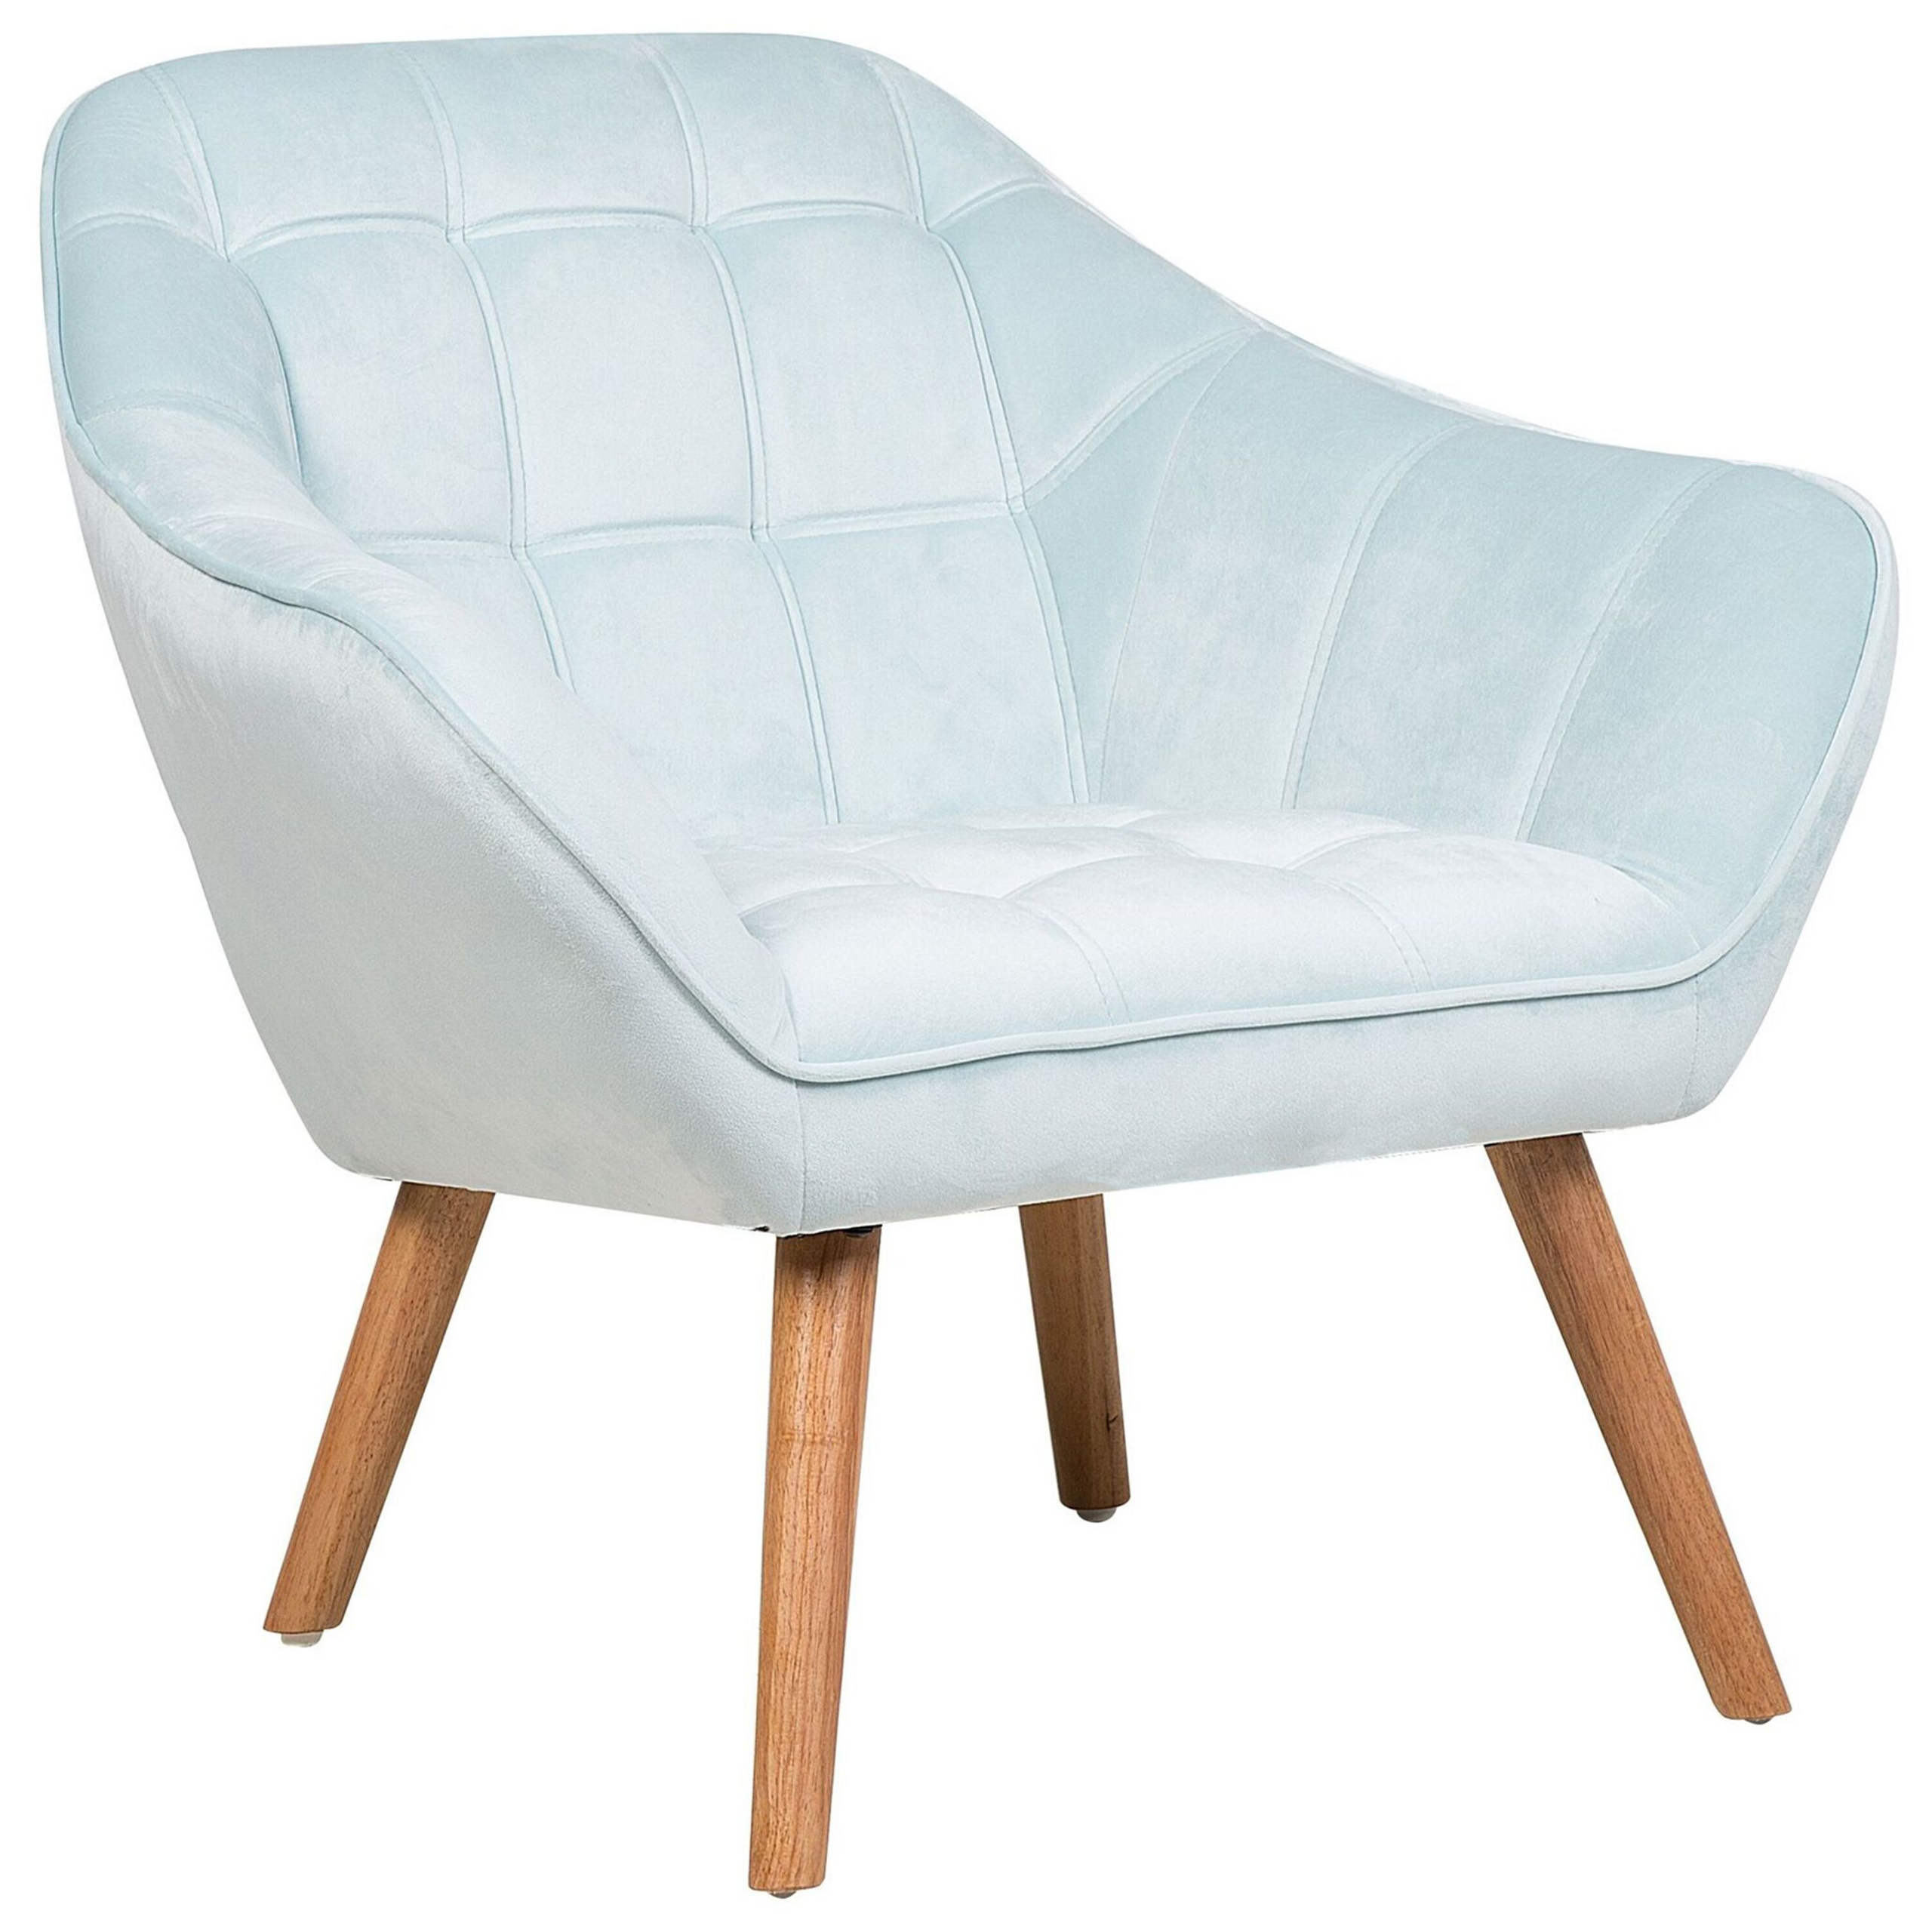 Beliani Armchair Light Blue Velvet Fabric Upholstery Glam Accent Chair with Wooden Legs